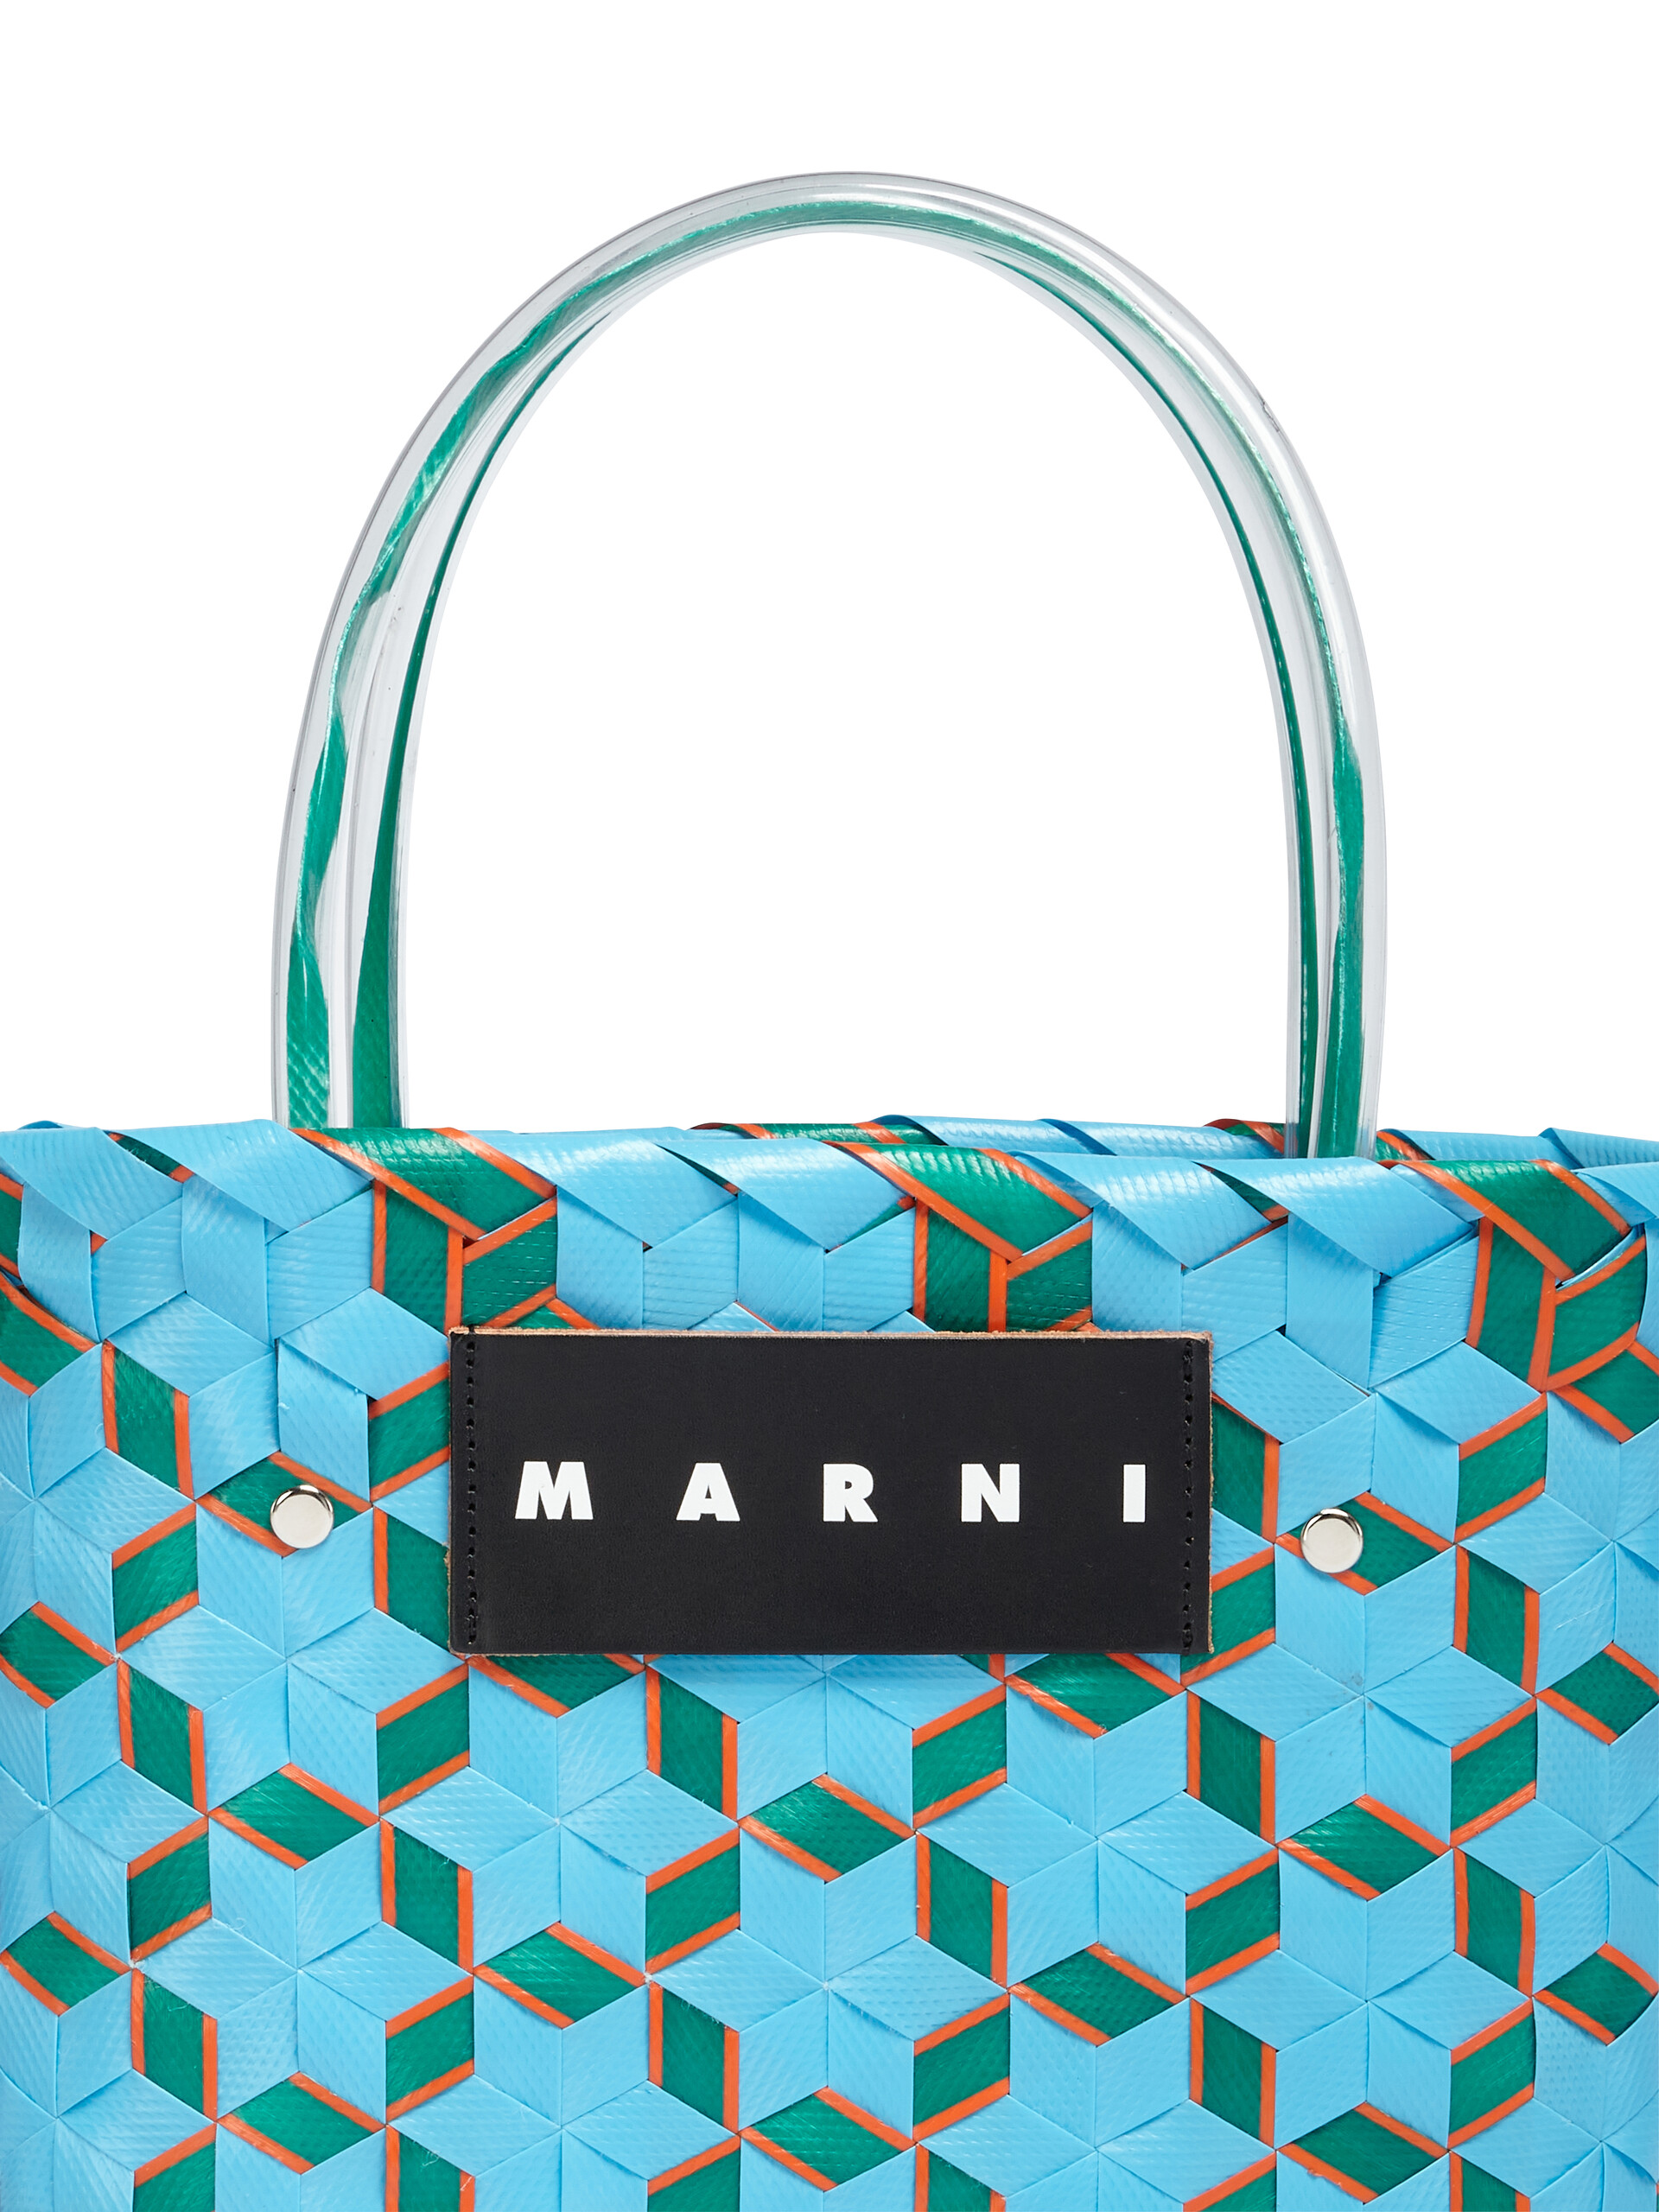 MARNI MARKET bag in pale blue star woven material - Bags - Image 4